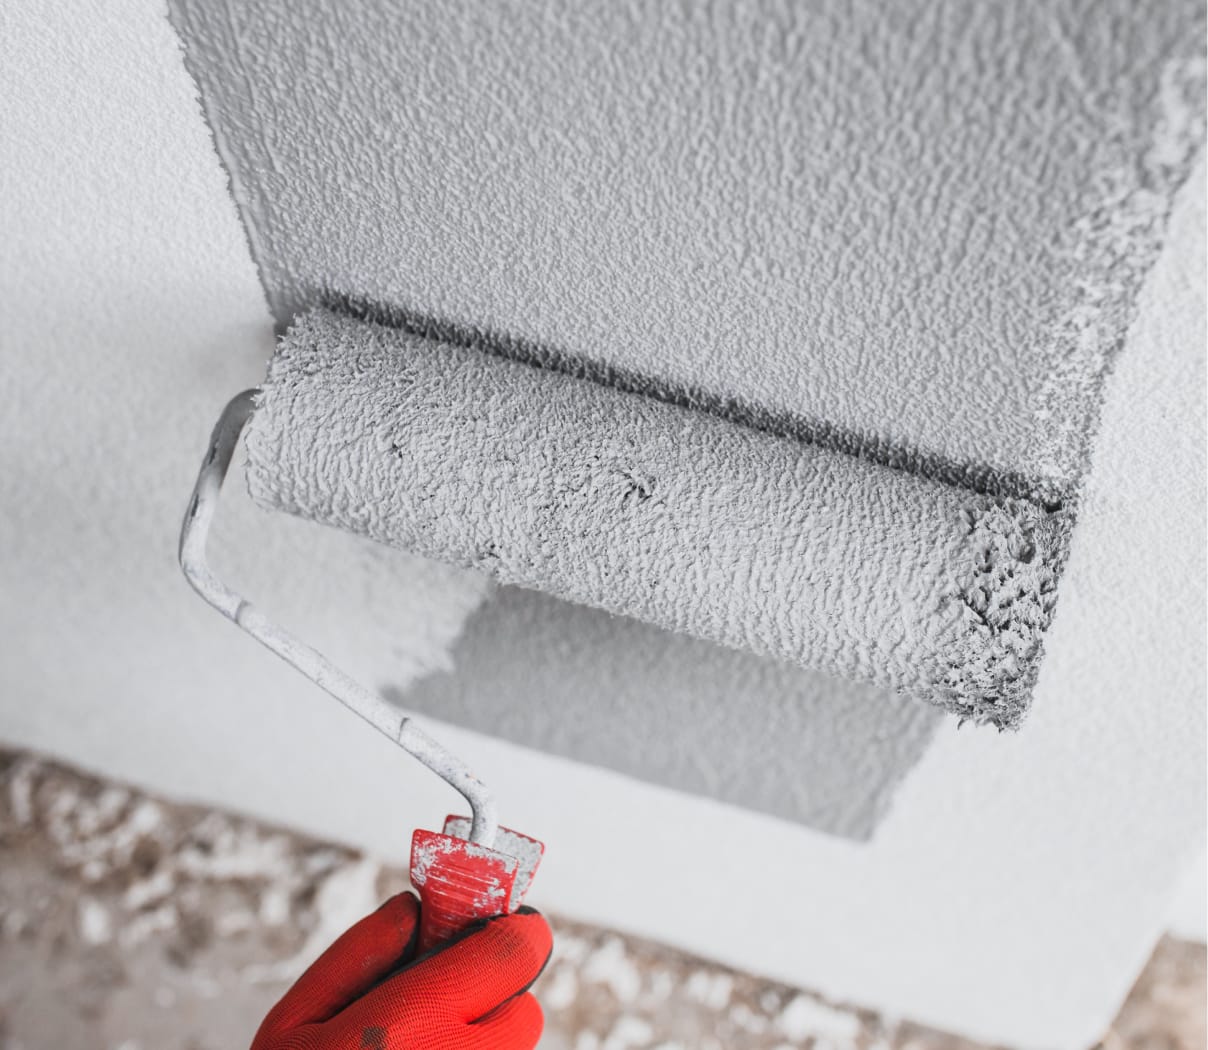 Worker using a roller to paint an interior wall